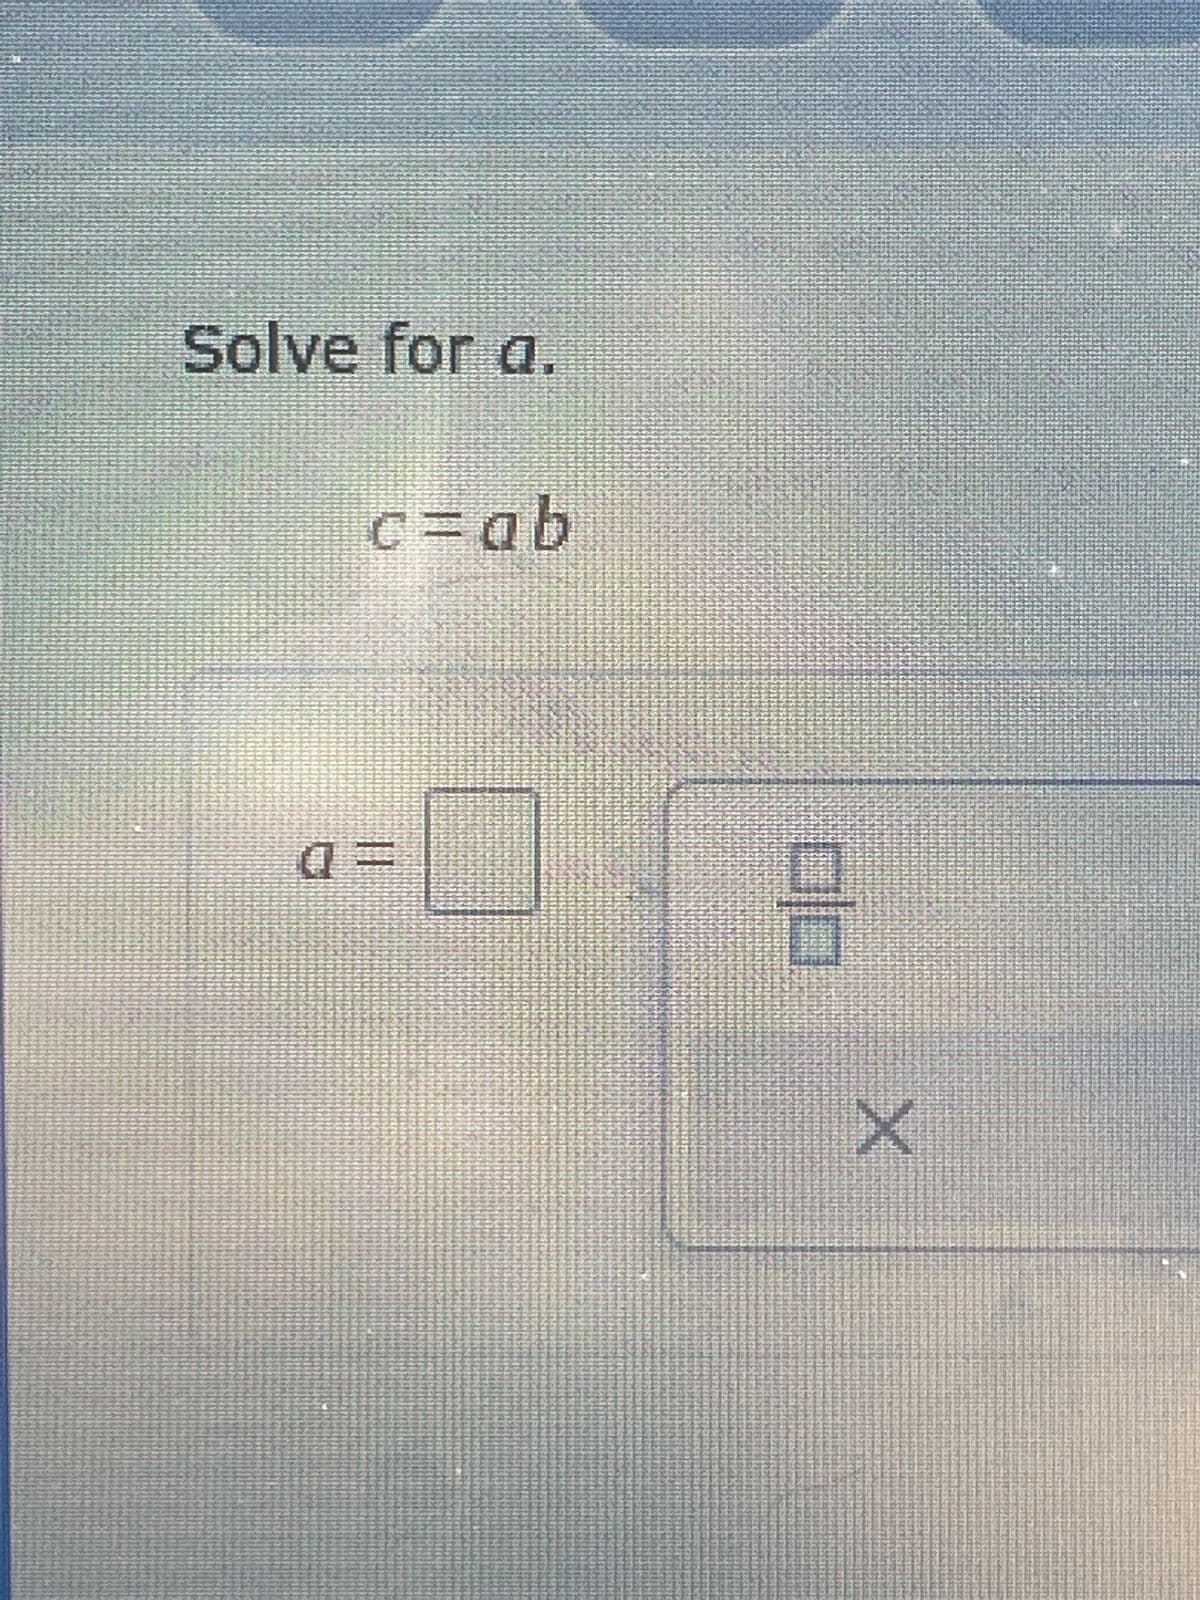 Solve for a.
a
c=ab
3
X